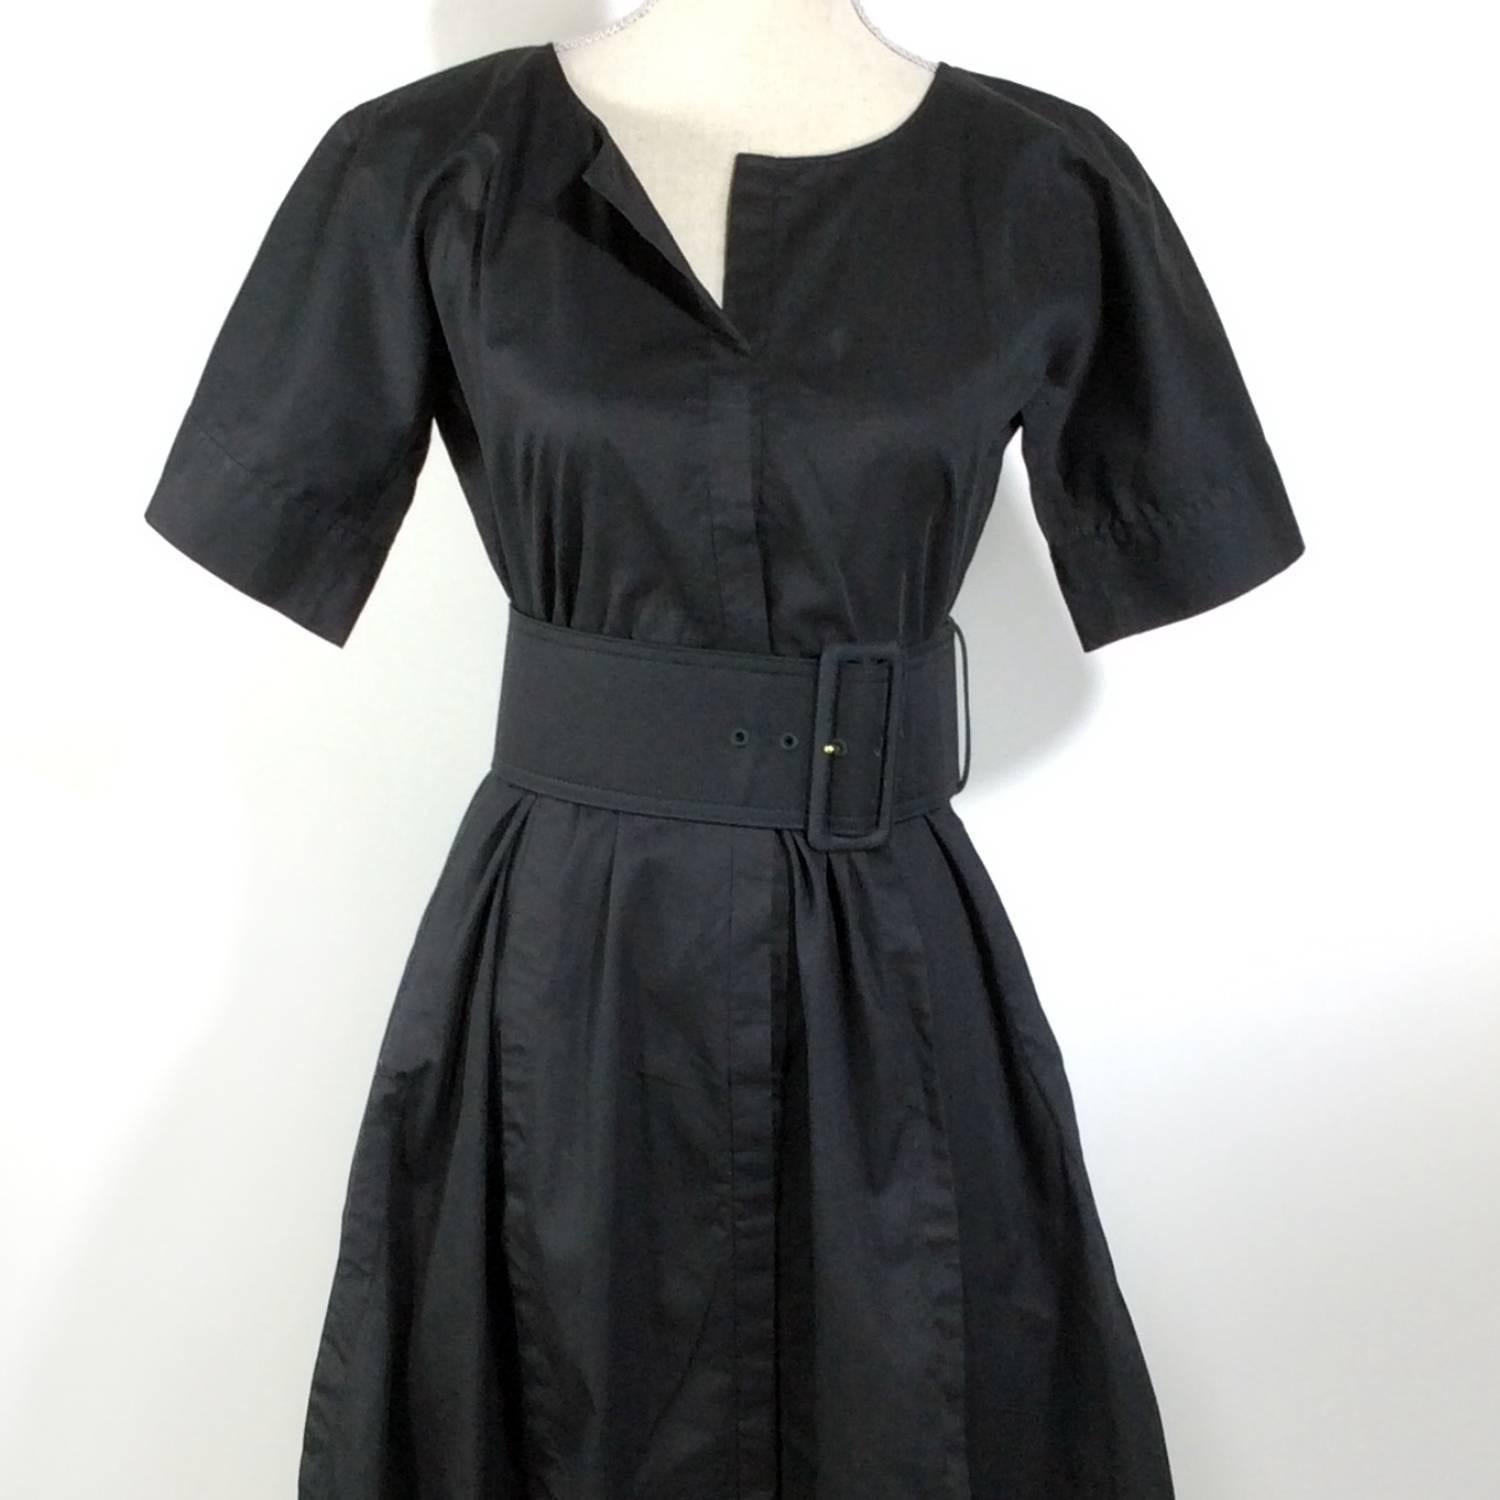 Style: Classic A Line Dress
Belt included
Button up closure
100% cotton

Euro Size 36
